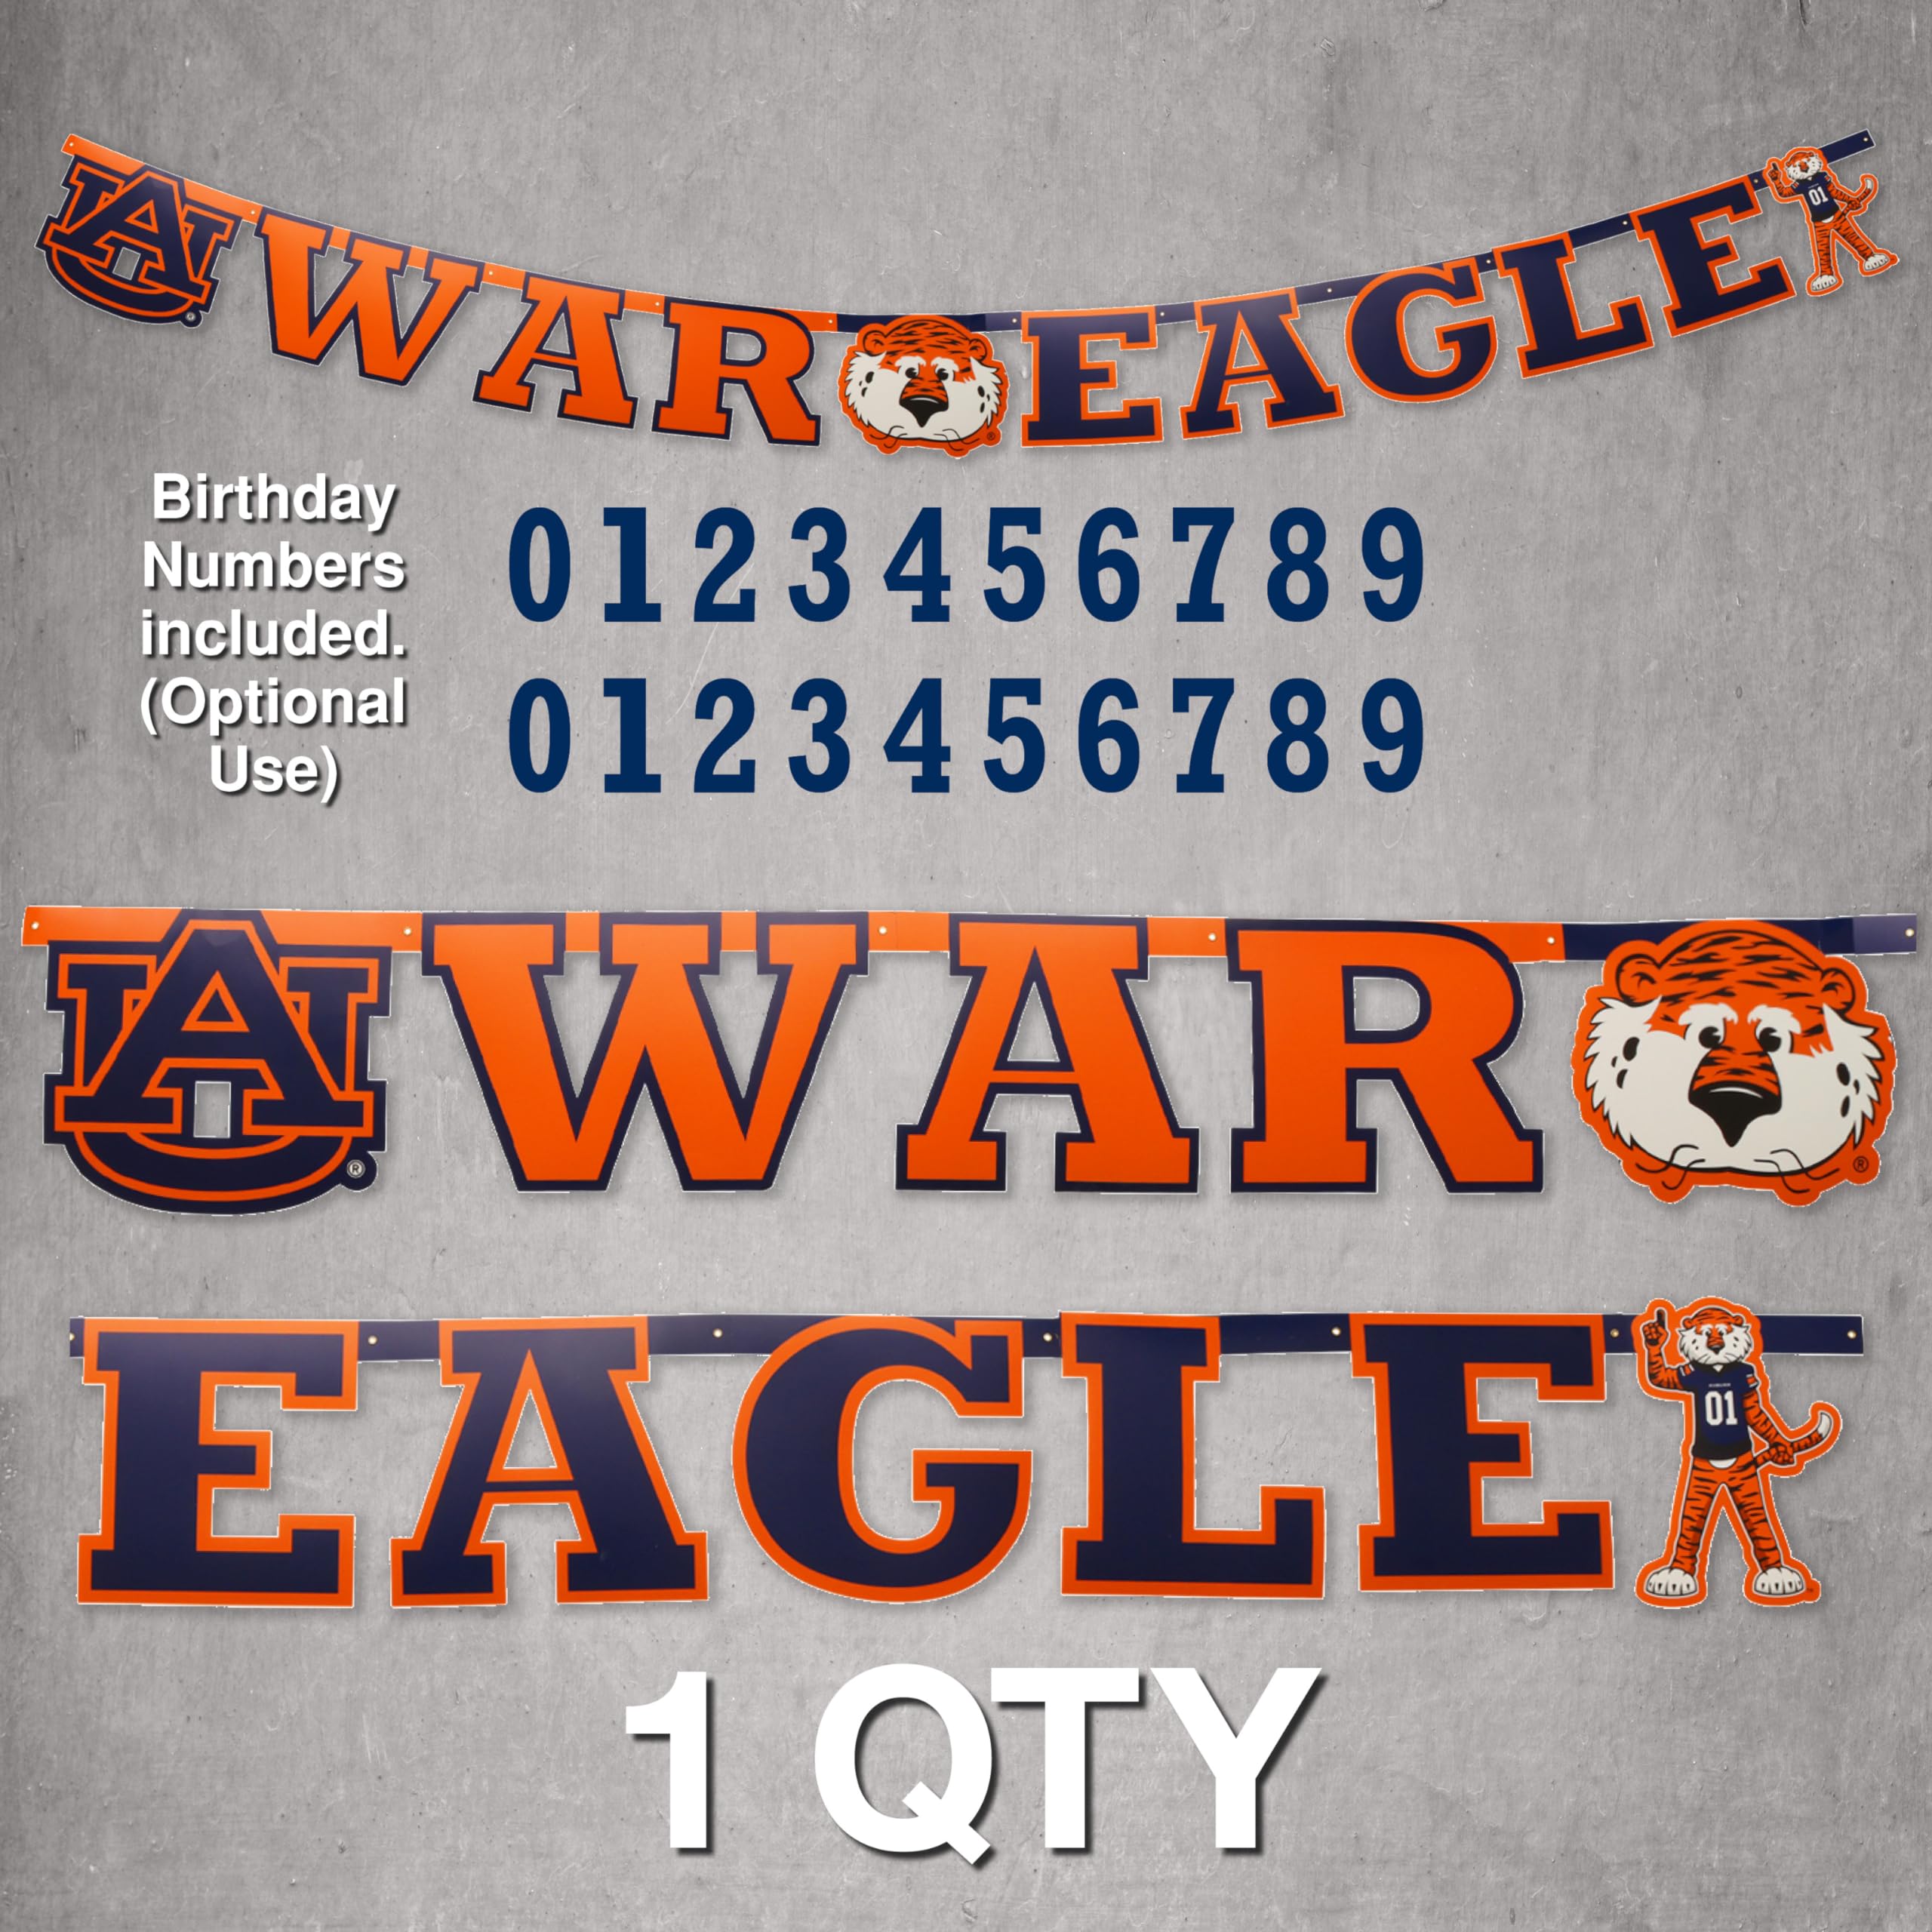 Auburn University War Eagle Banner! 7 ¾ Foot Long Banner. Proudly Displaying the Official Auburn Logo & Aubie! For Tailgates, Graduation, Birthdays, Football Parties, Dorm or Home Decor! by Havercamp